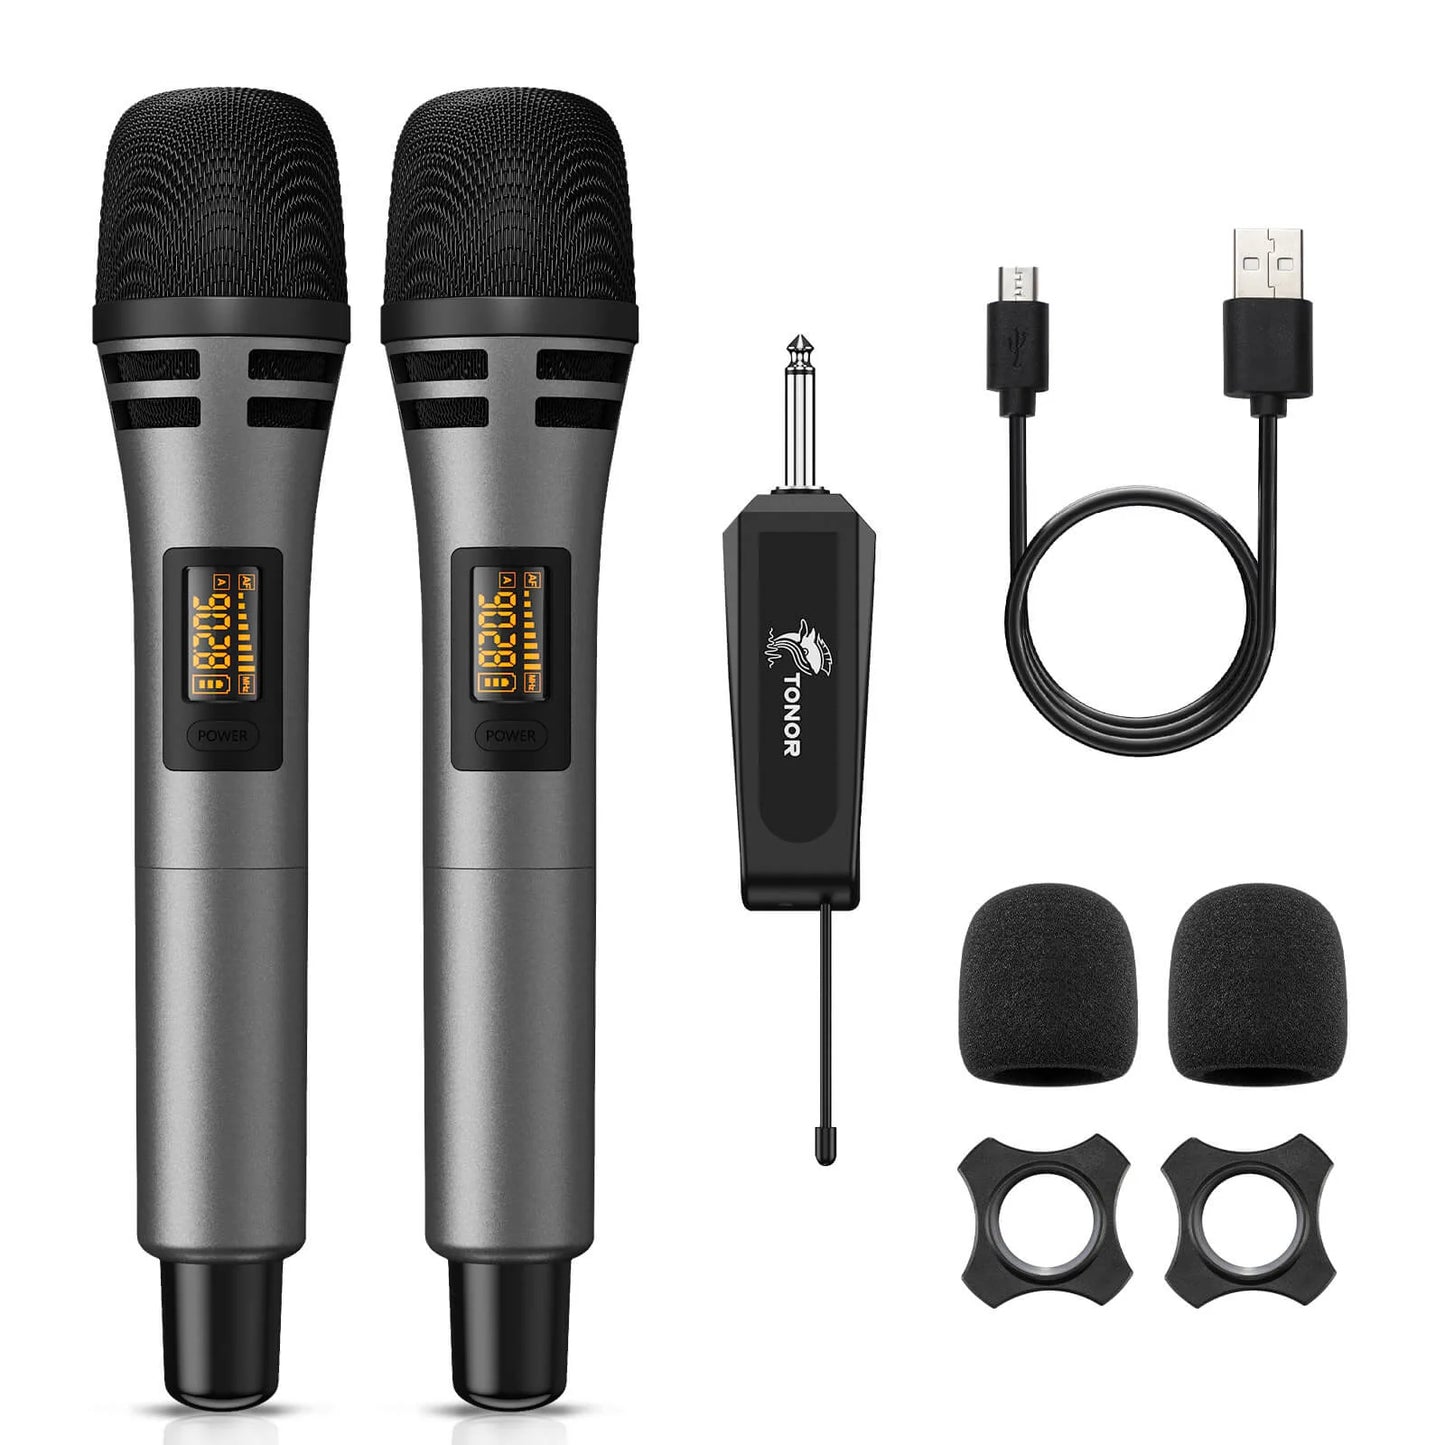 TONOR TW-320 wireless microphone (two pieces)